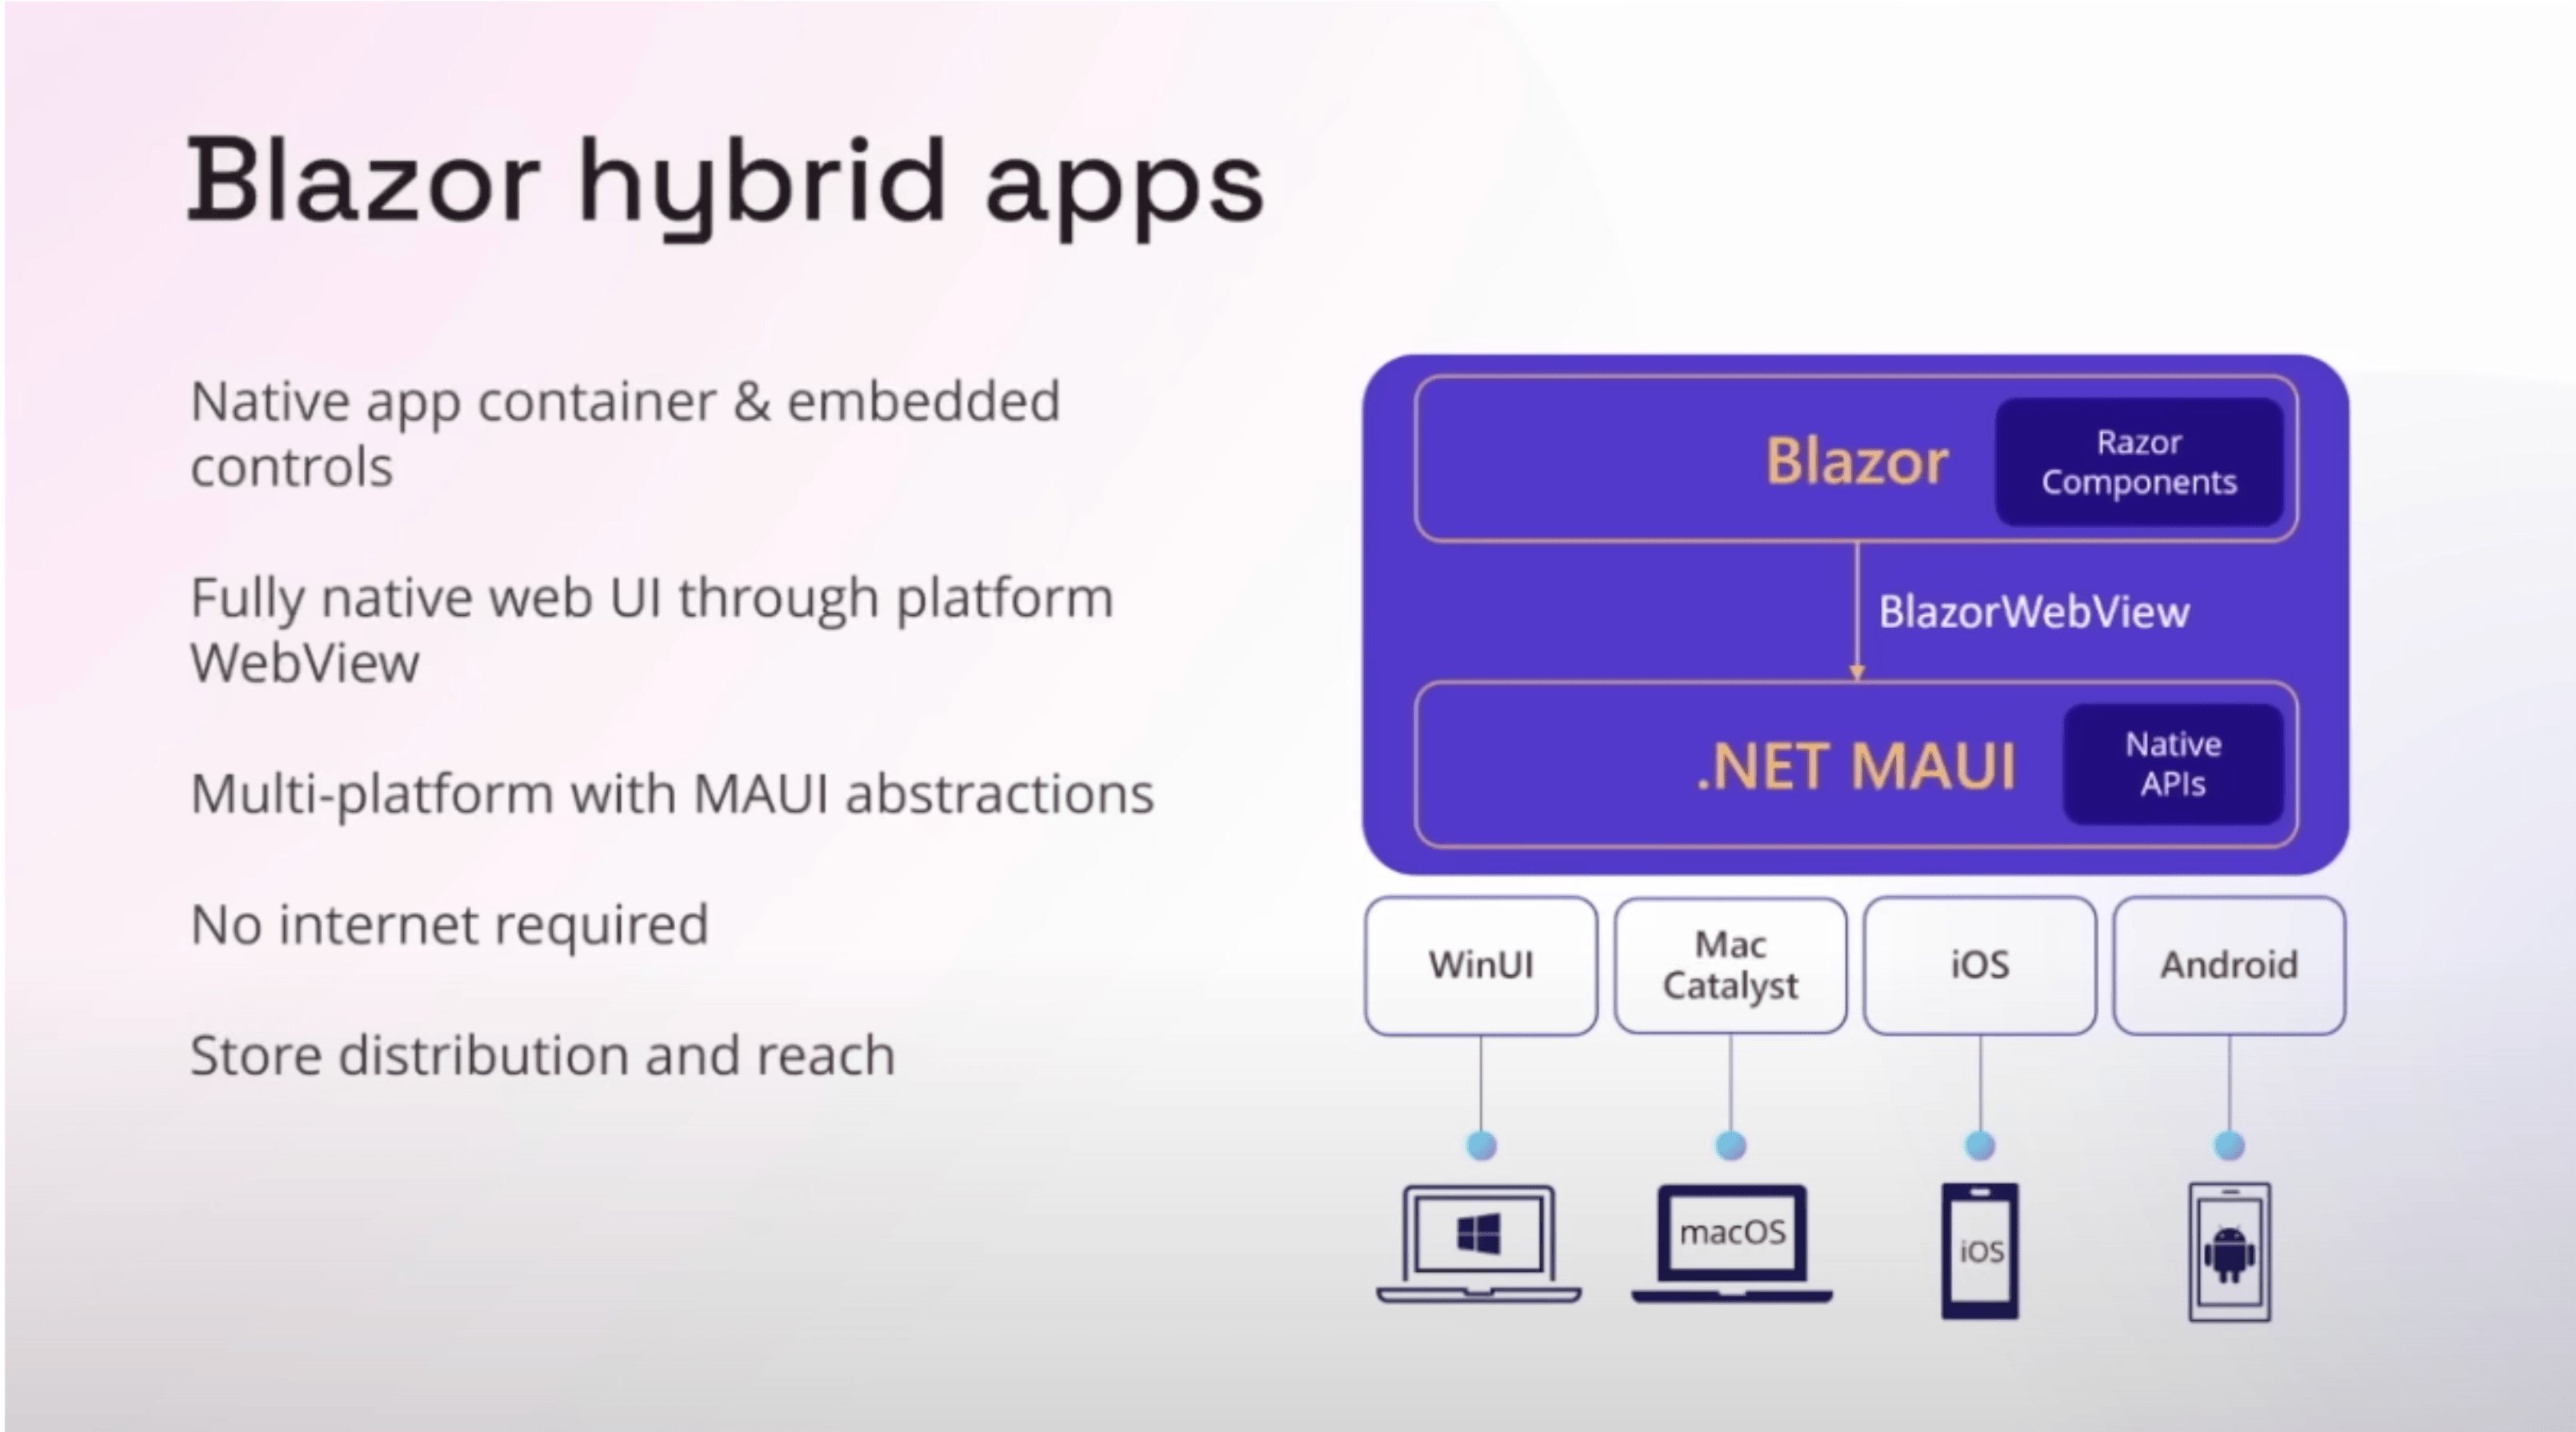 Native app container and embedded controls, fully native web UI through platform web view, multi platform with Maui abstractions, no Internet required, store distribution and reach. Blazor with razor components uses BlazorWebView and goes to .NET MAUI with native APIs. WinUI to Windows, Mac Catalyst to macOS, iOS to iOS, Android to Android.